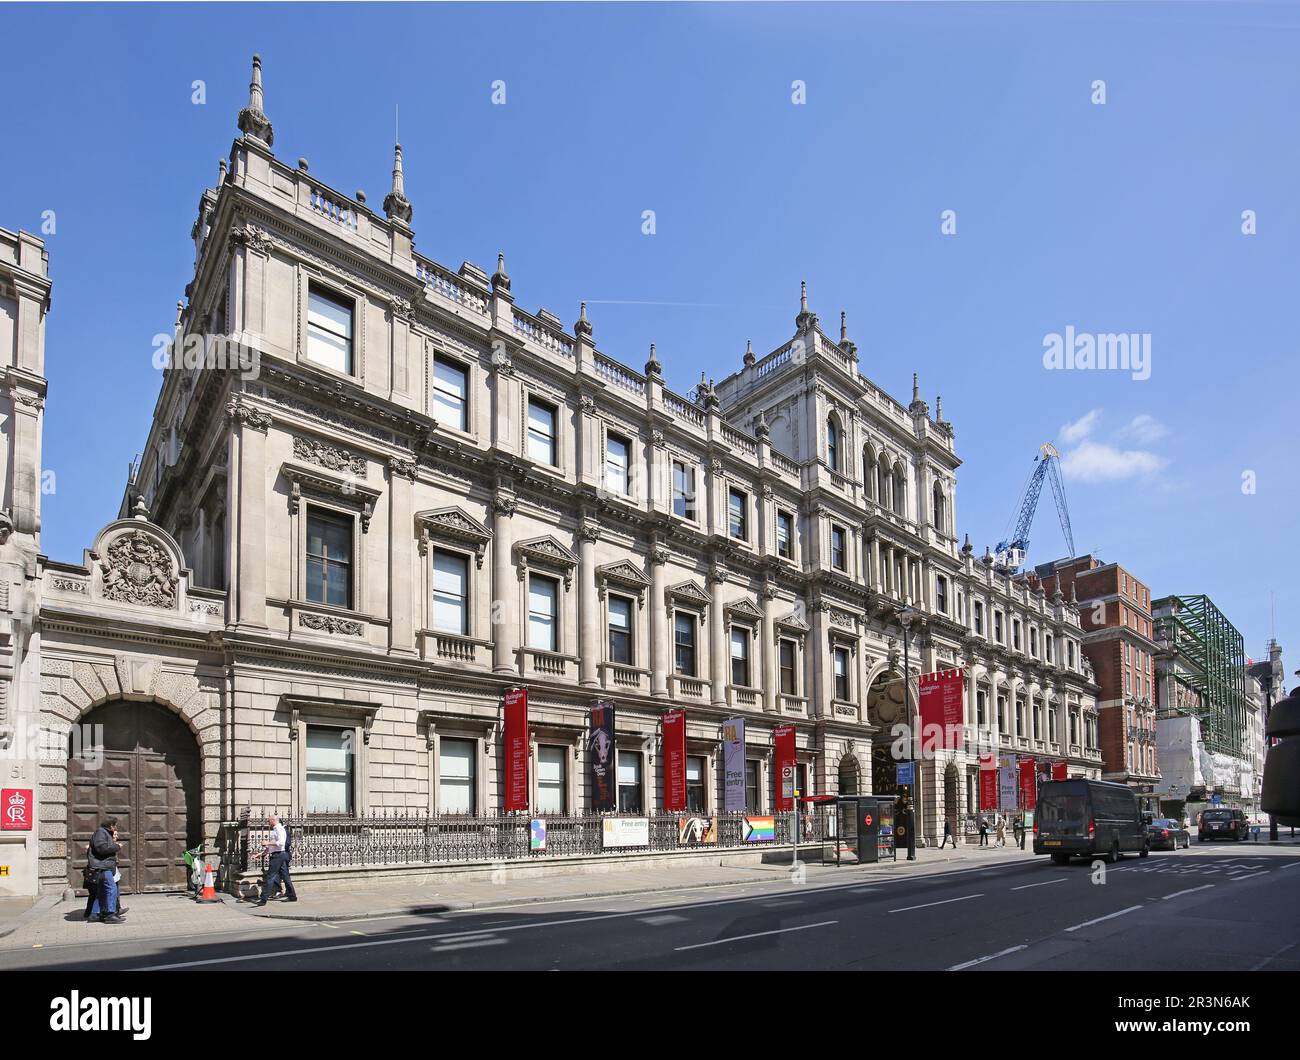 Burlington House, Piccadilly, London, UK. Home to the The Royal Academy of Arts. Main street elevation. Stock Photo